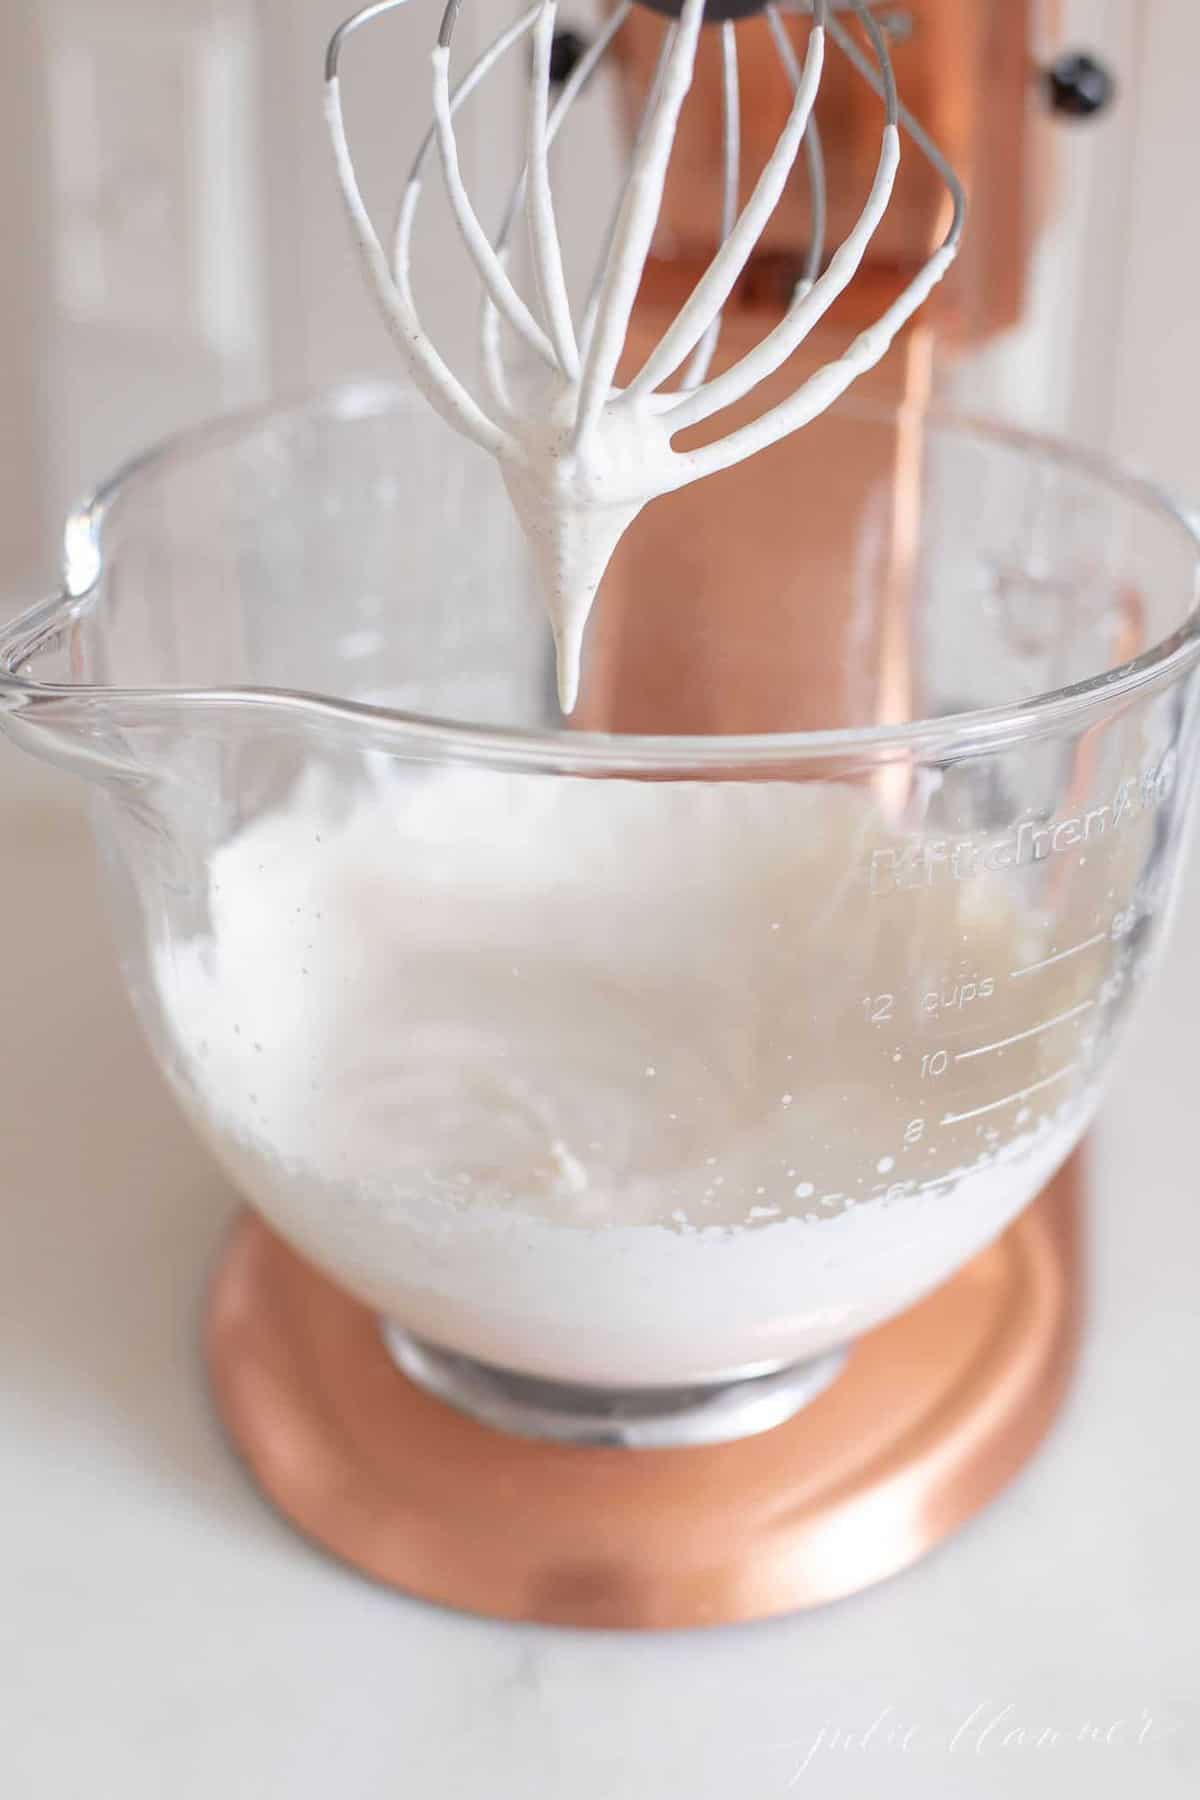 Copper Kitchenaid mixer with glass bowl, filled with whipped cream.